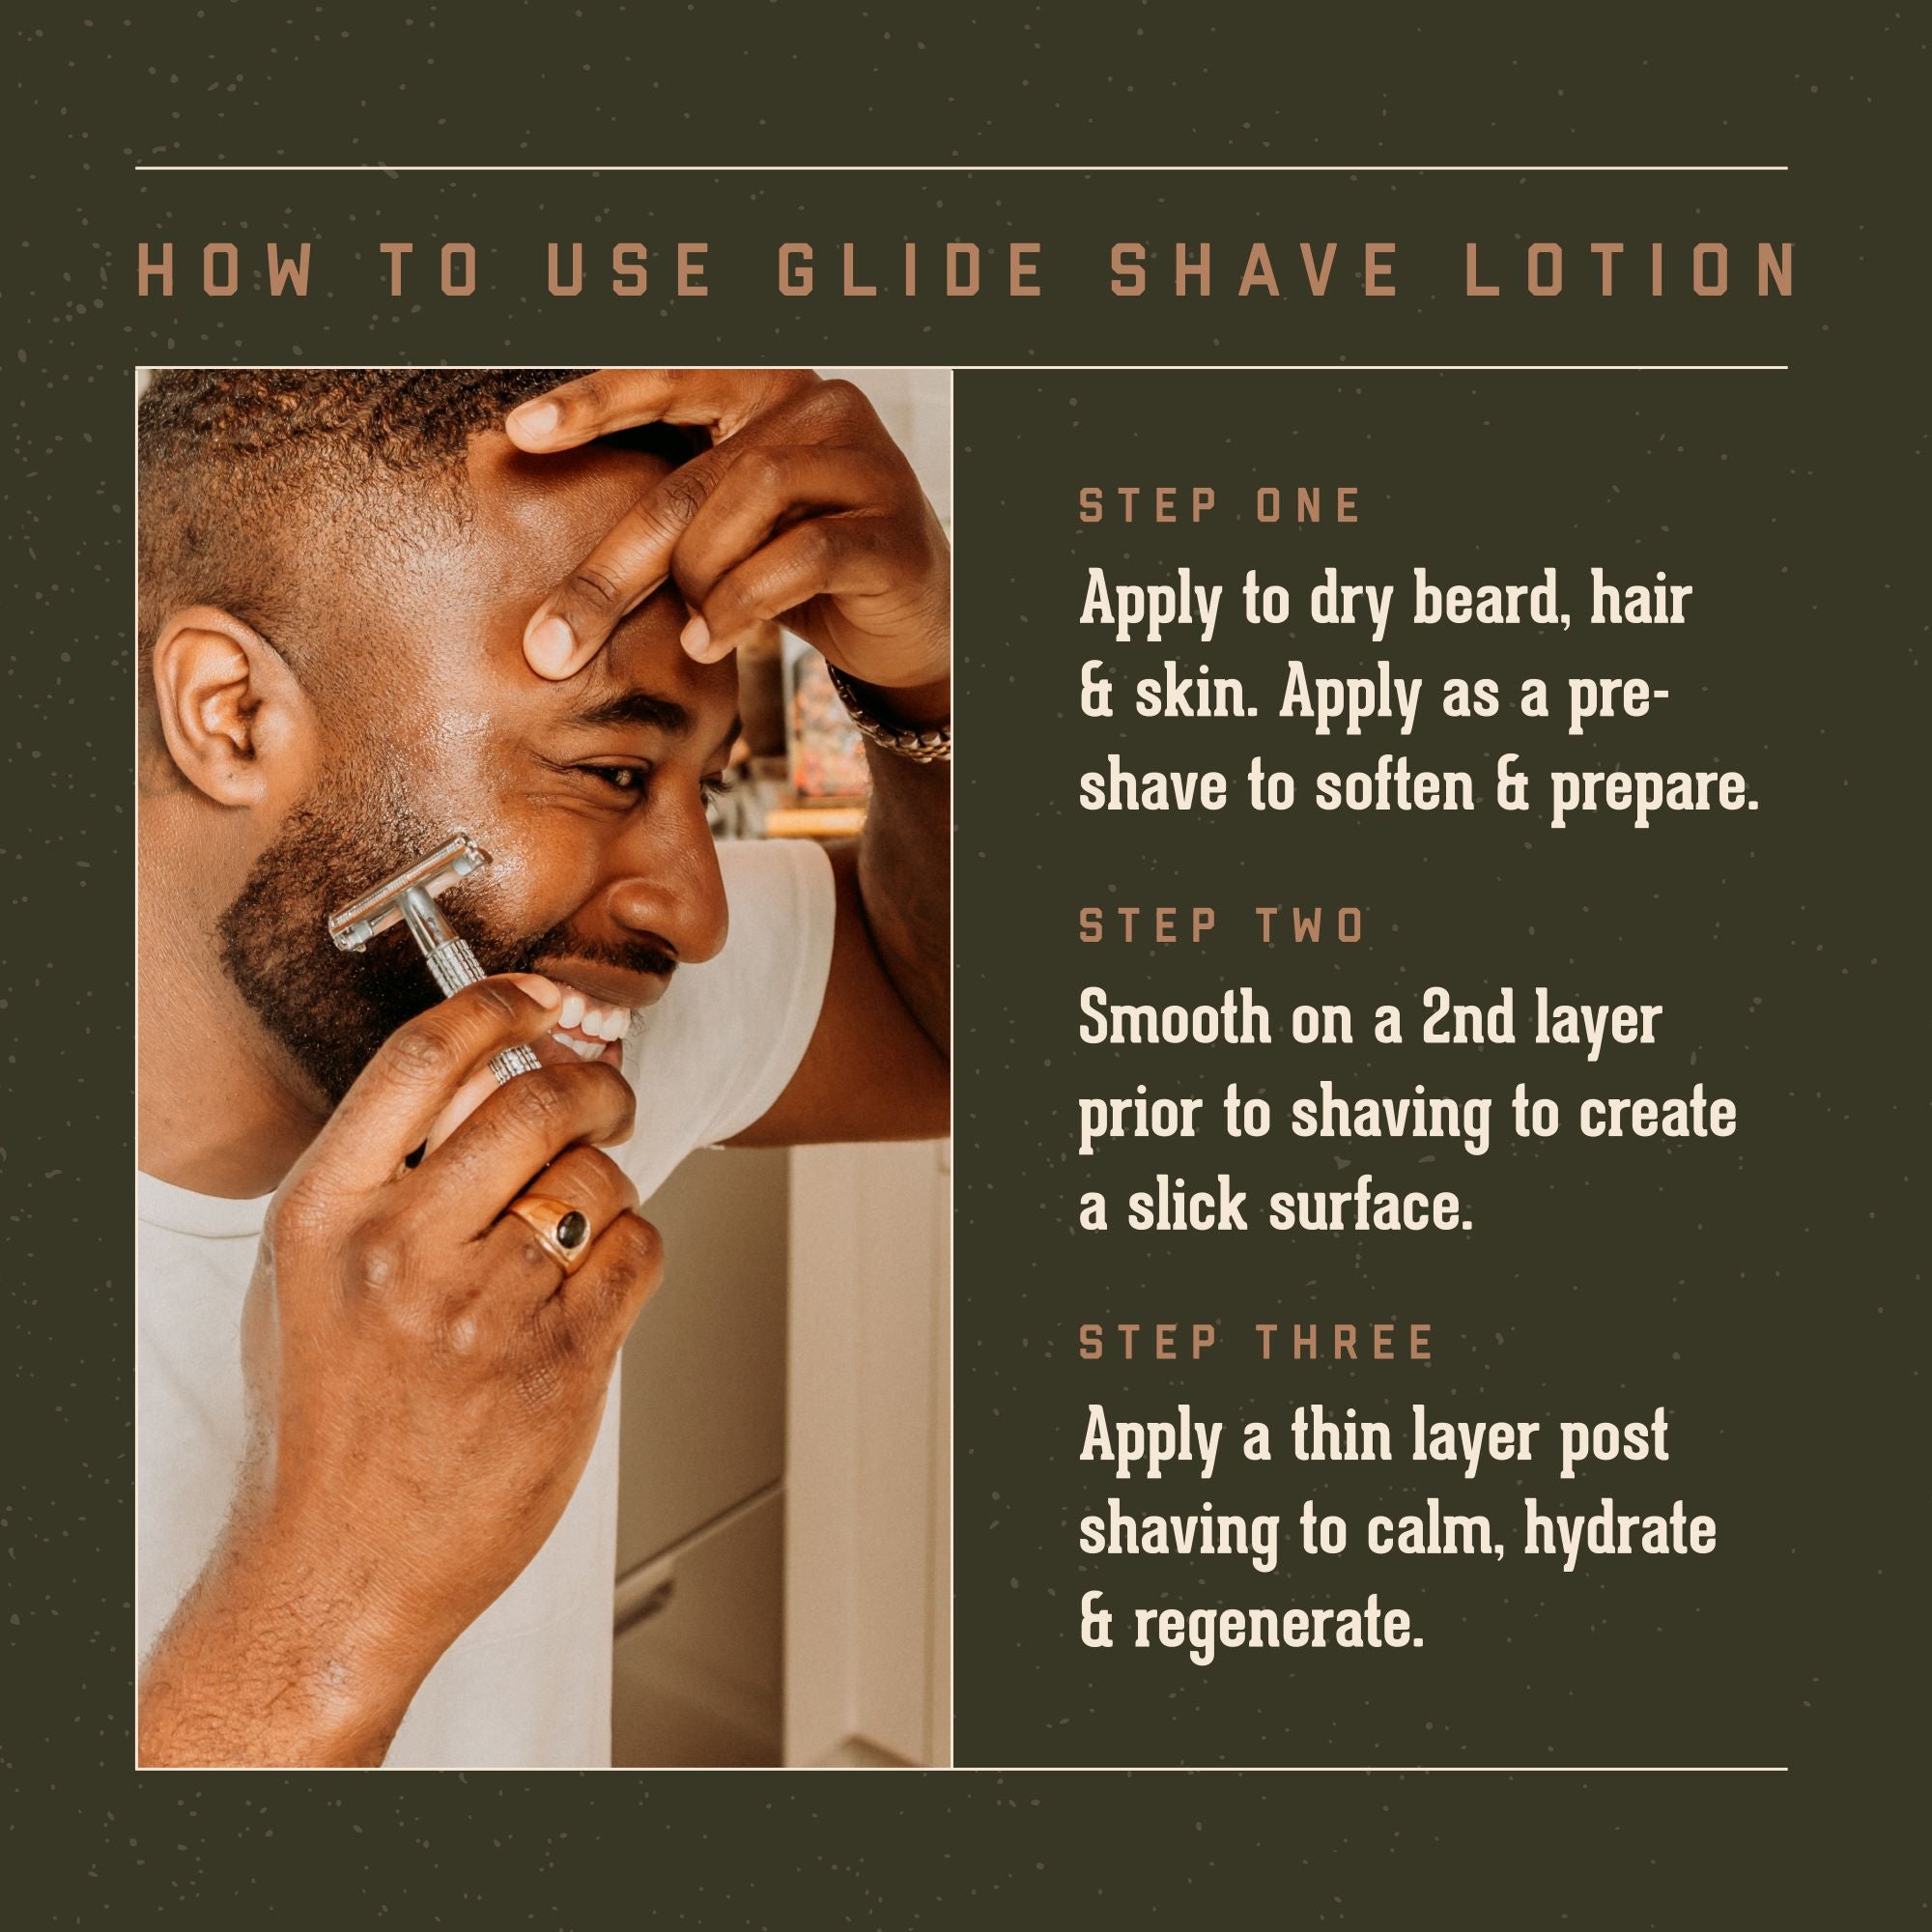 Glide Shave Lotion How to Use: Step One: Apply to dry beard, hair & skin. Apply as a pre-shave to soften and prepare. Step Two: smooth on a 2nd layer prior to shaving to create a slick surgace. Step Three: apply a thin layer post shaving to calm, hydrate and regenerate skin cells.